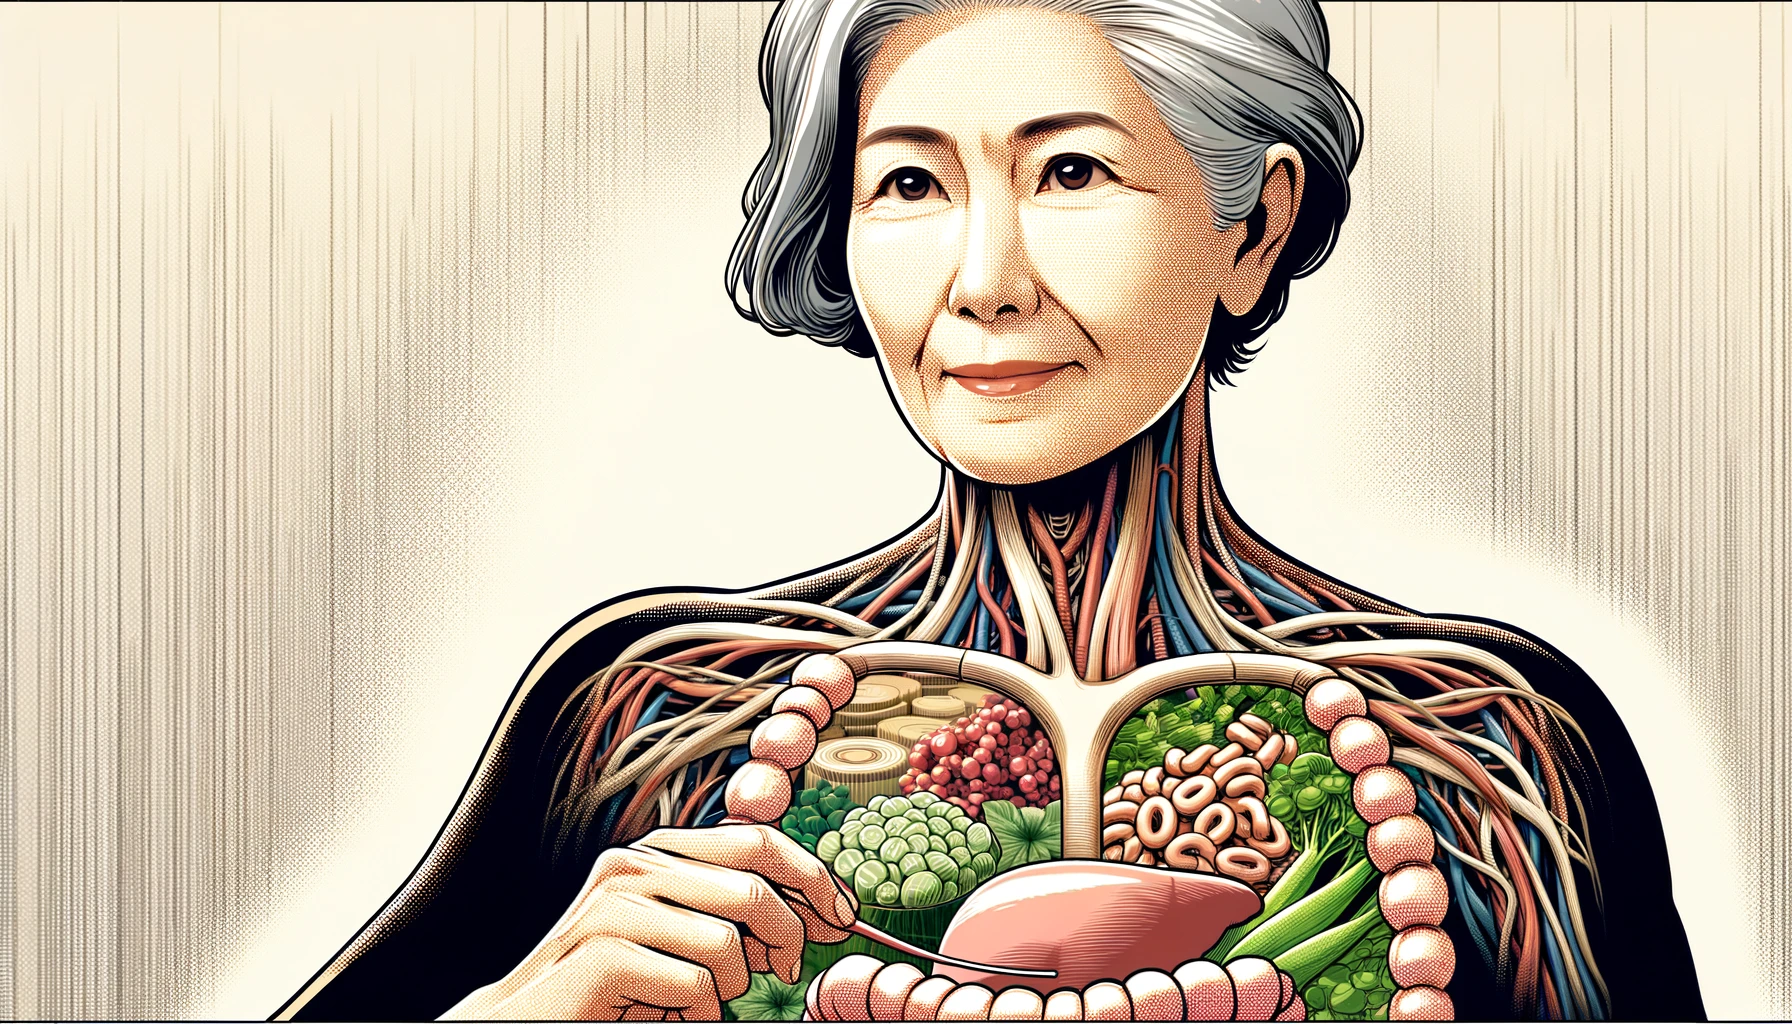 Nutrients direct intestinal stem cell function and affect ageing